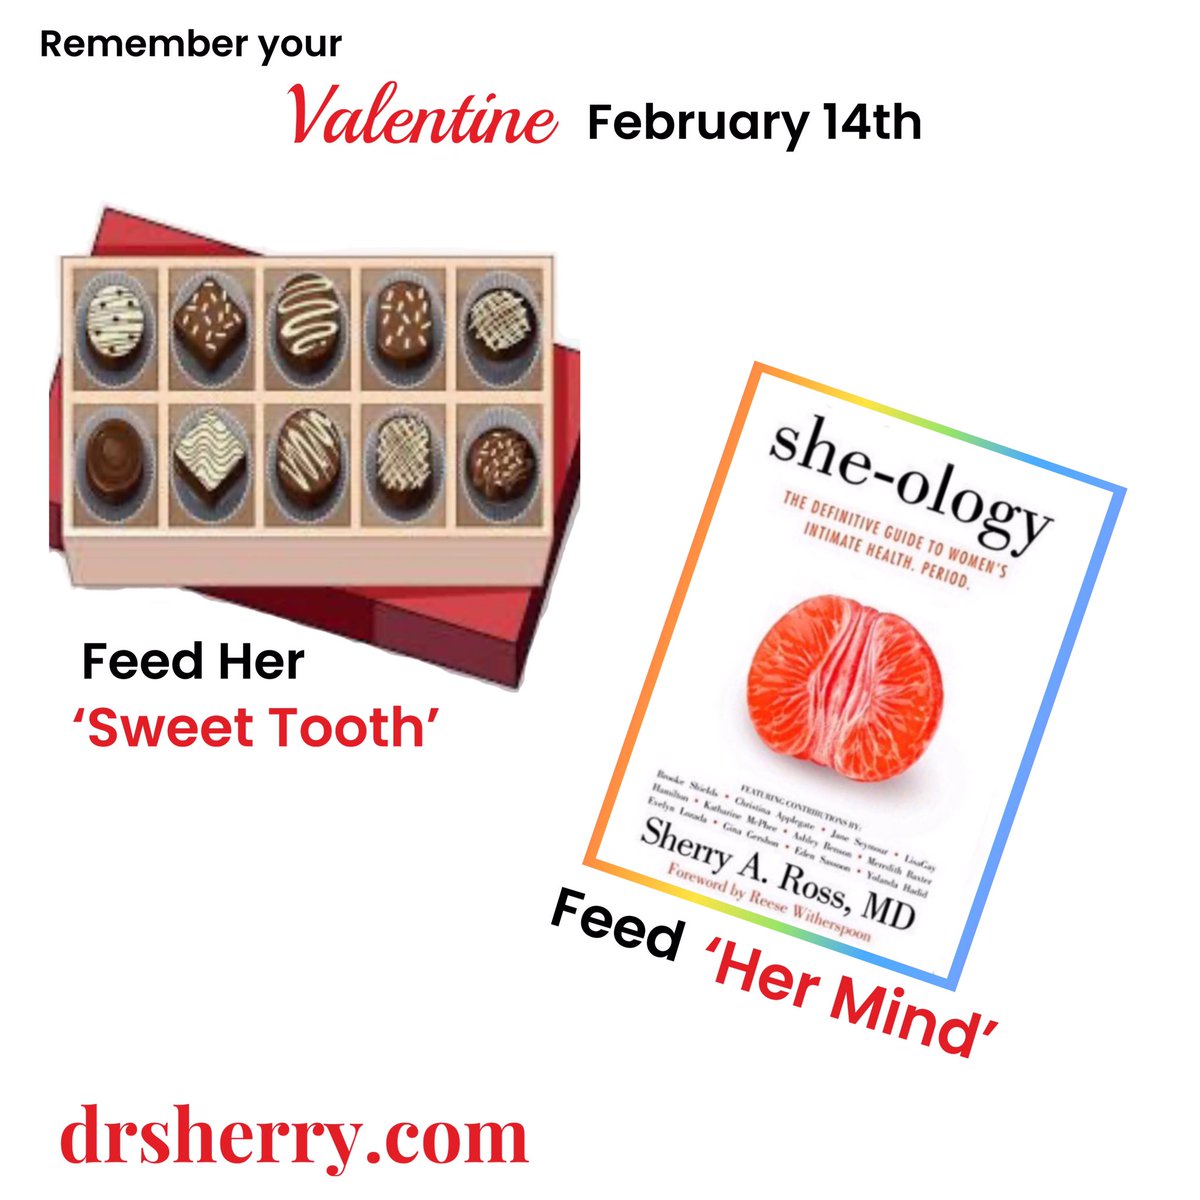 Remember Your Valentine February 14th Visit our ready stock at link in bio drsherry.com/collections/sh…